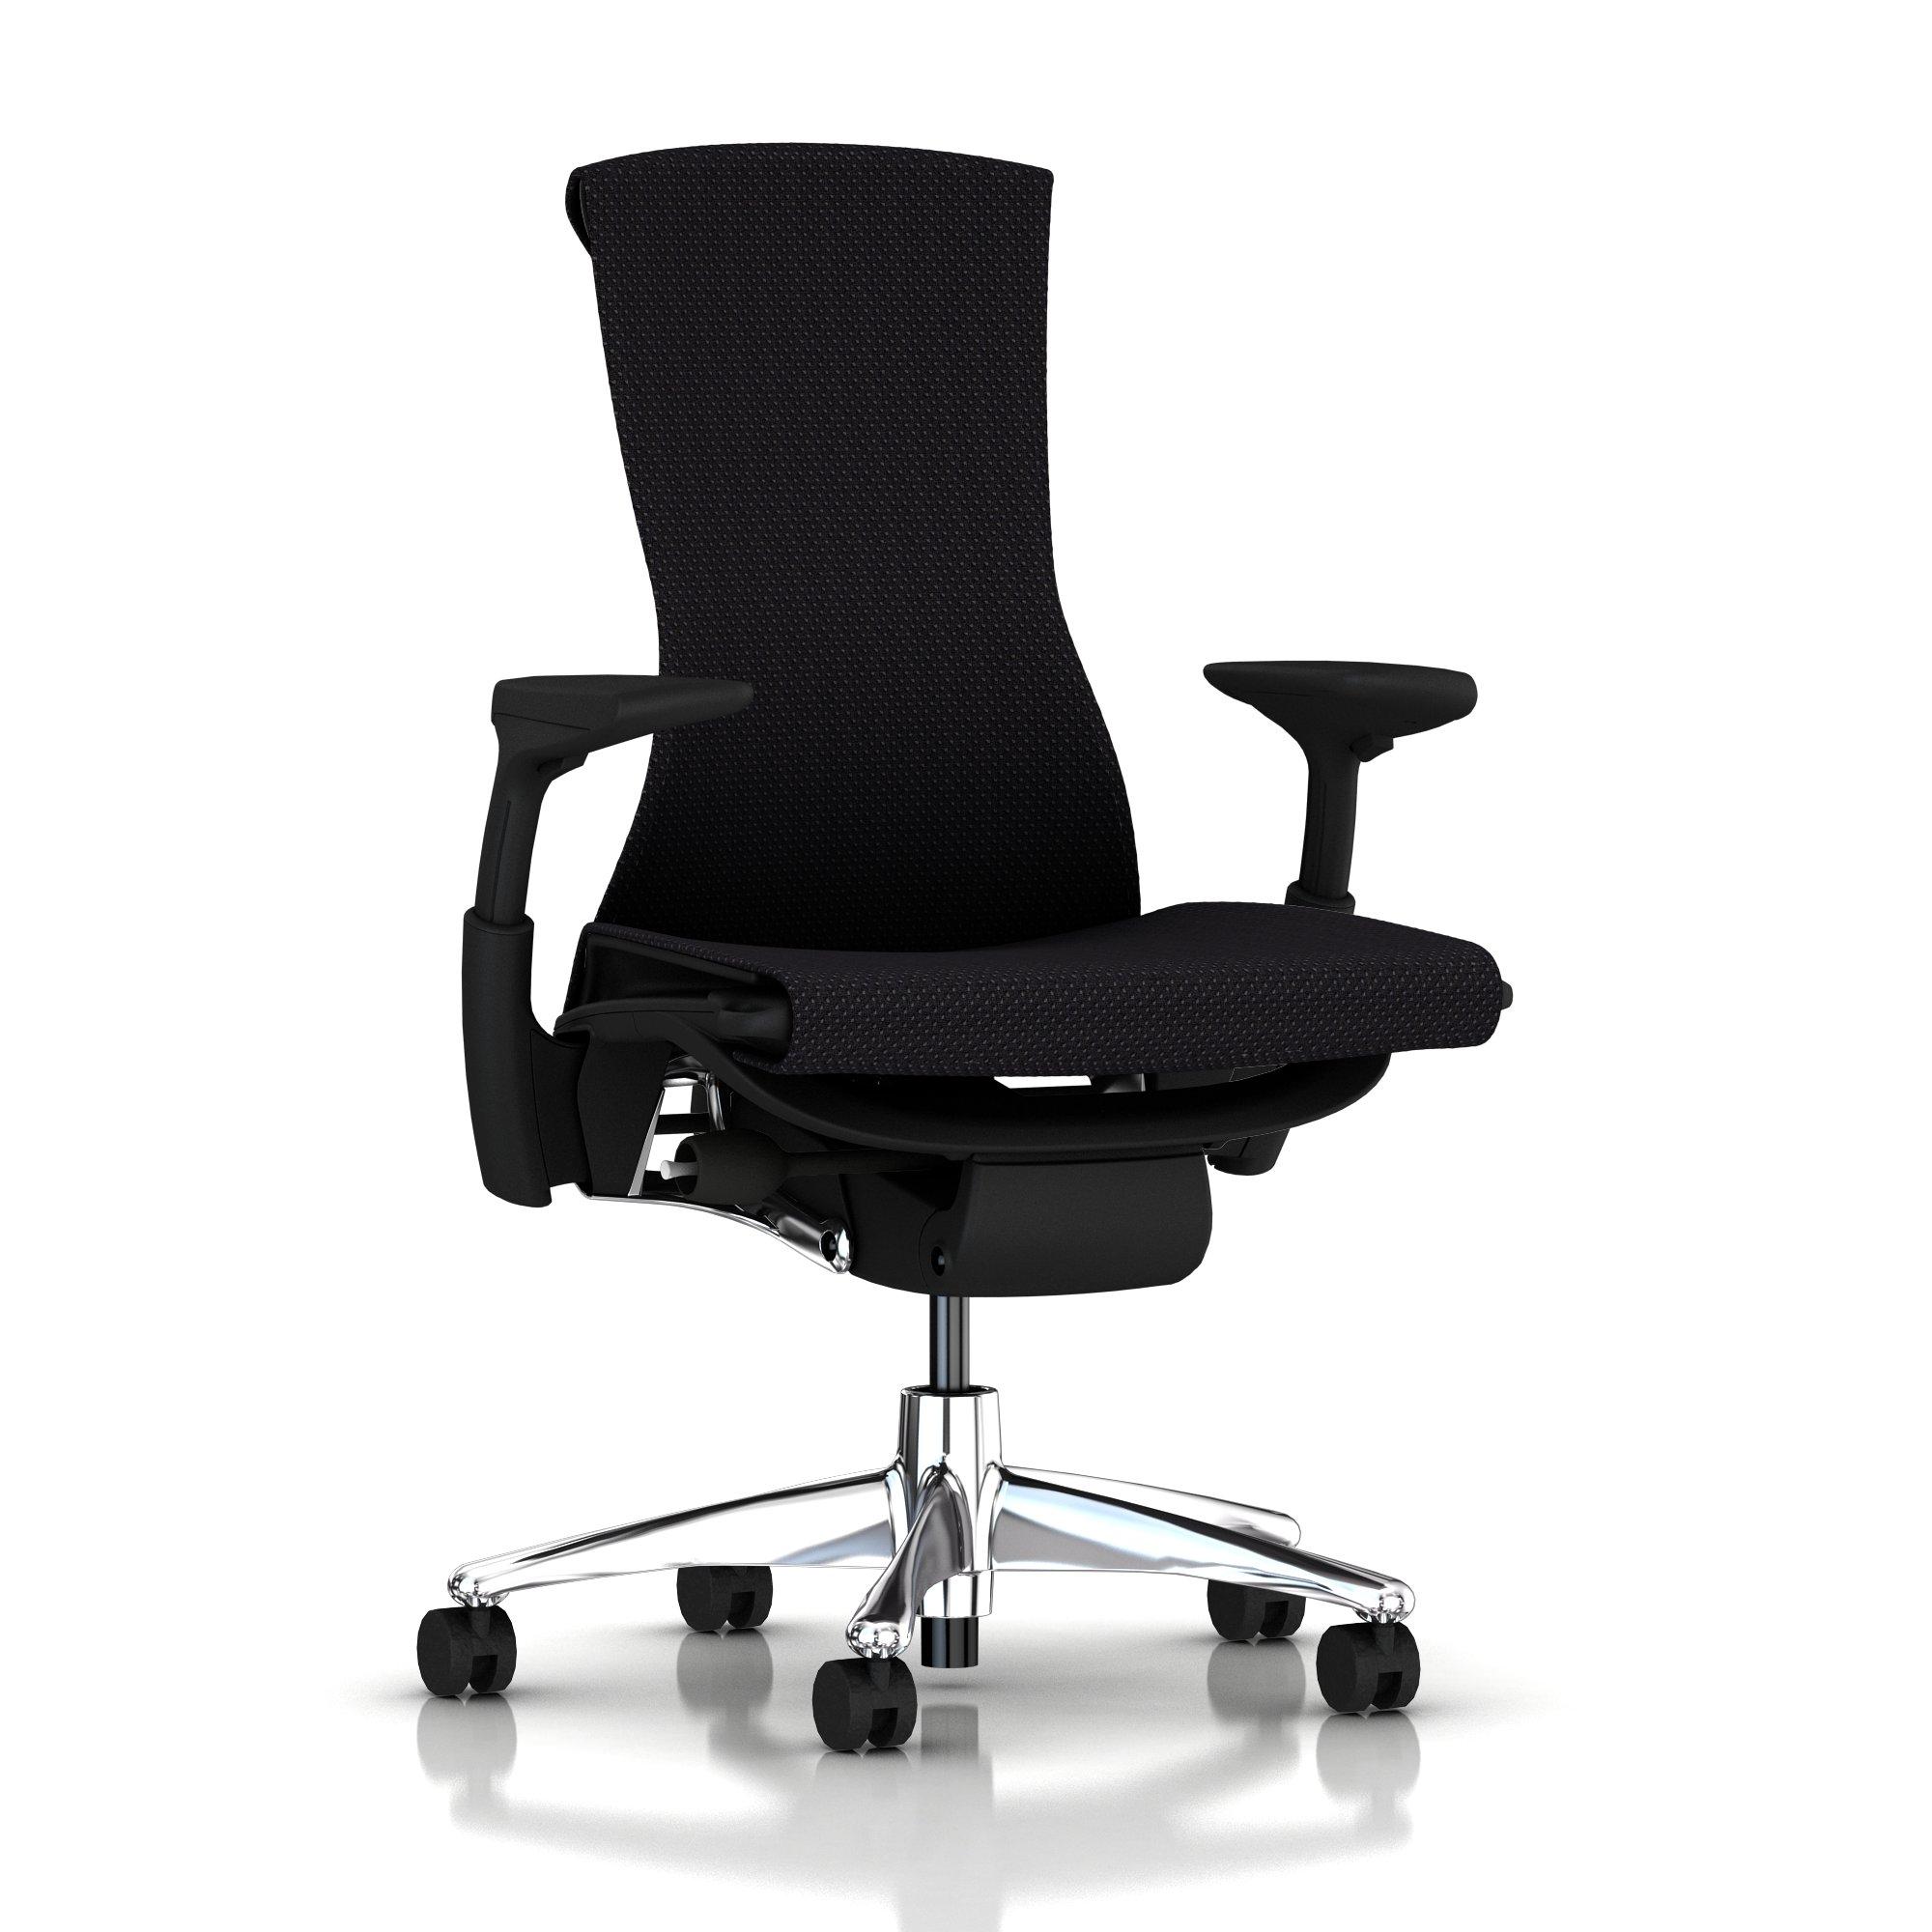 Embody Chair Black Balance with Graphite Frame Aluminum Base by Herman Miller